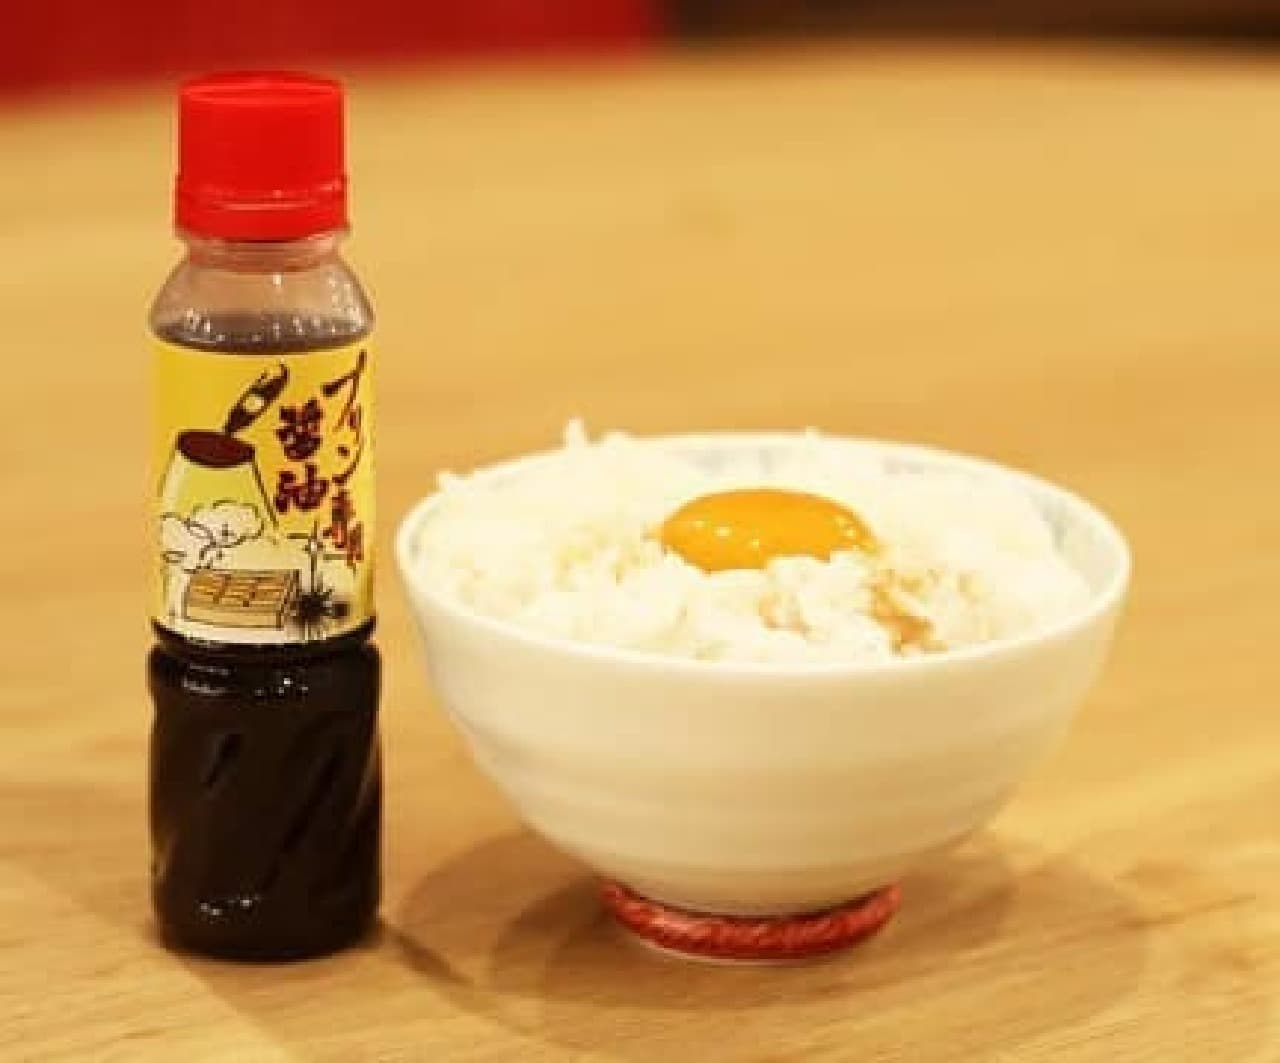 It seems to go well with egg-shaped rice